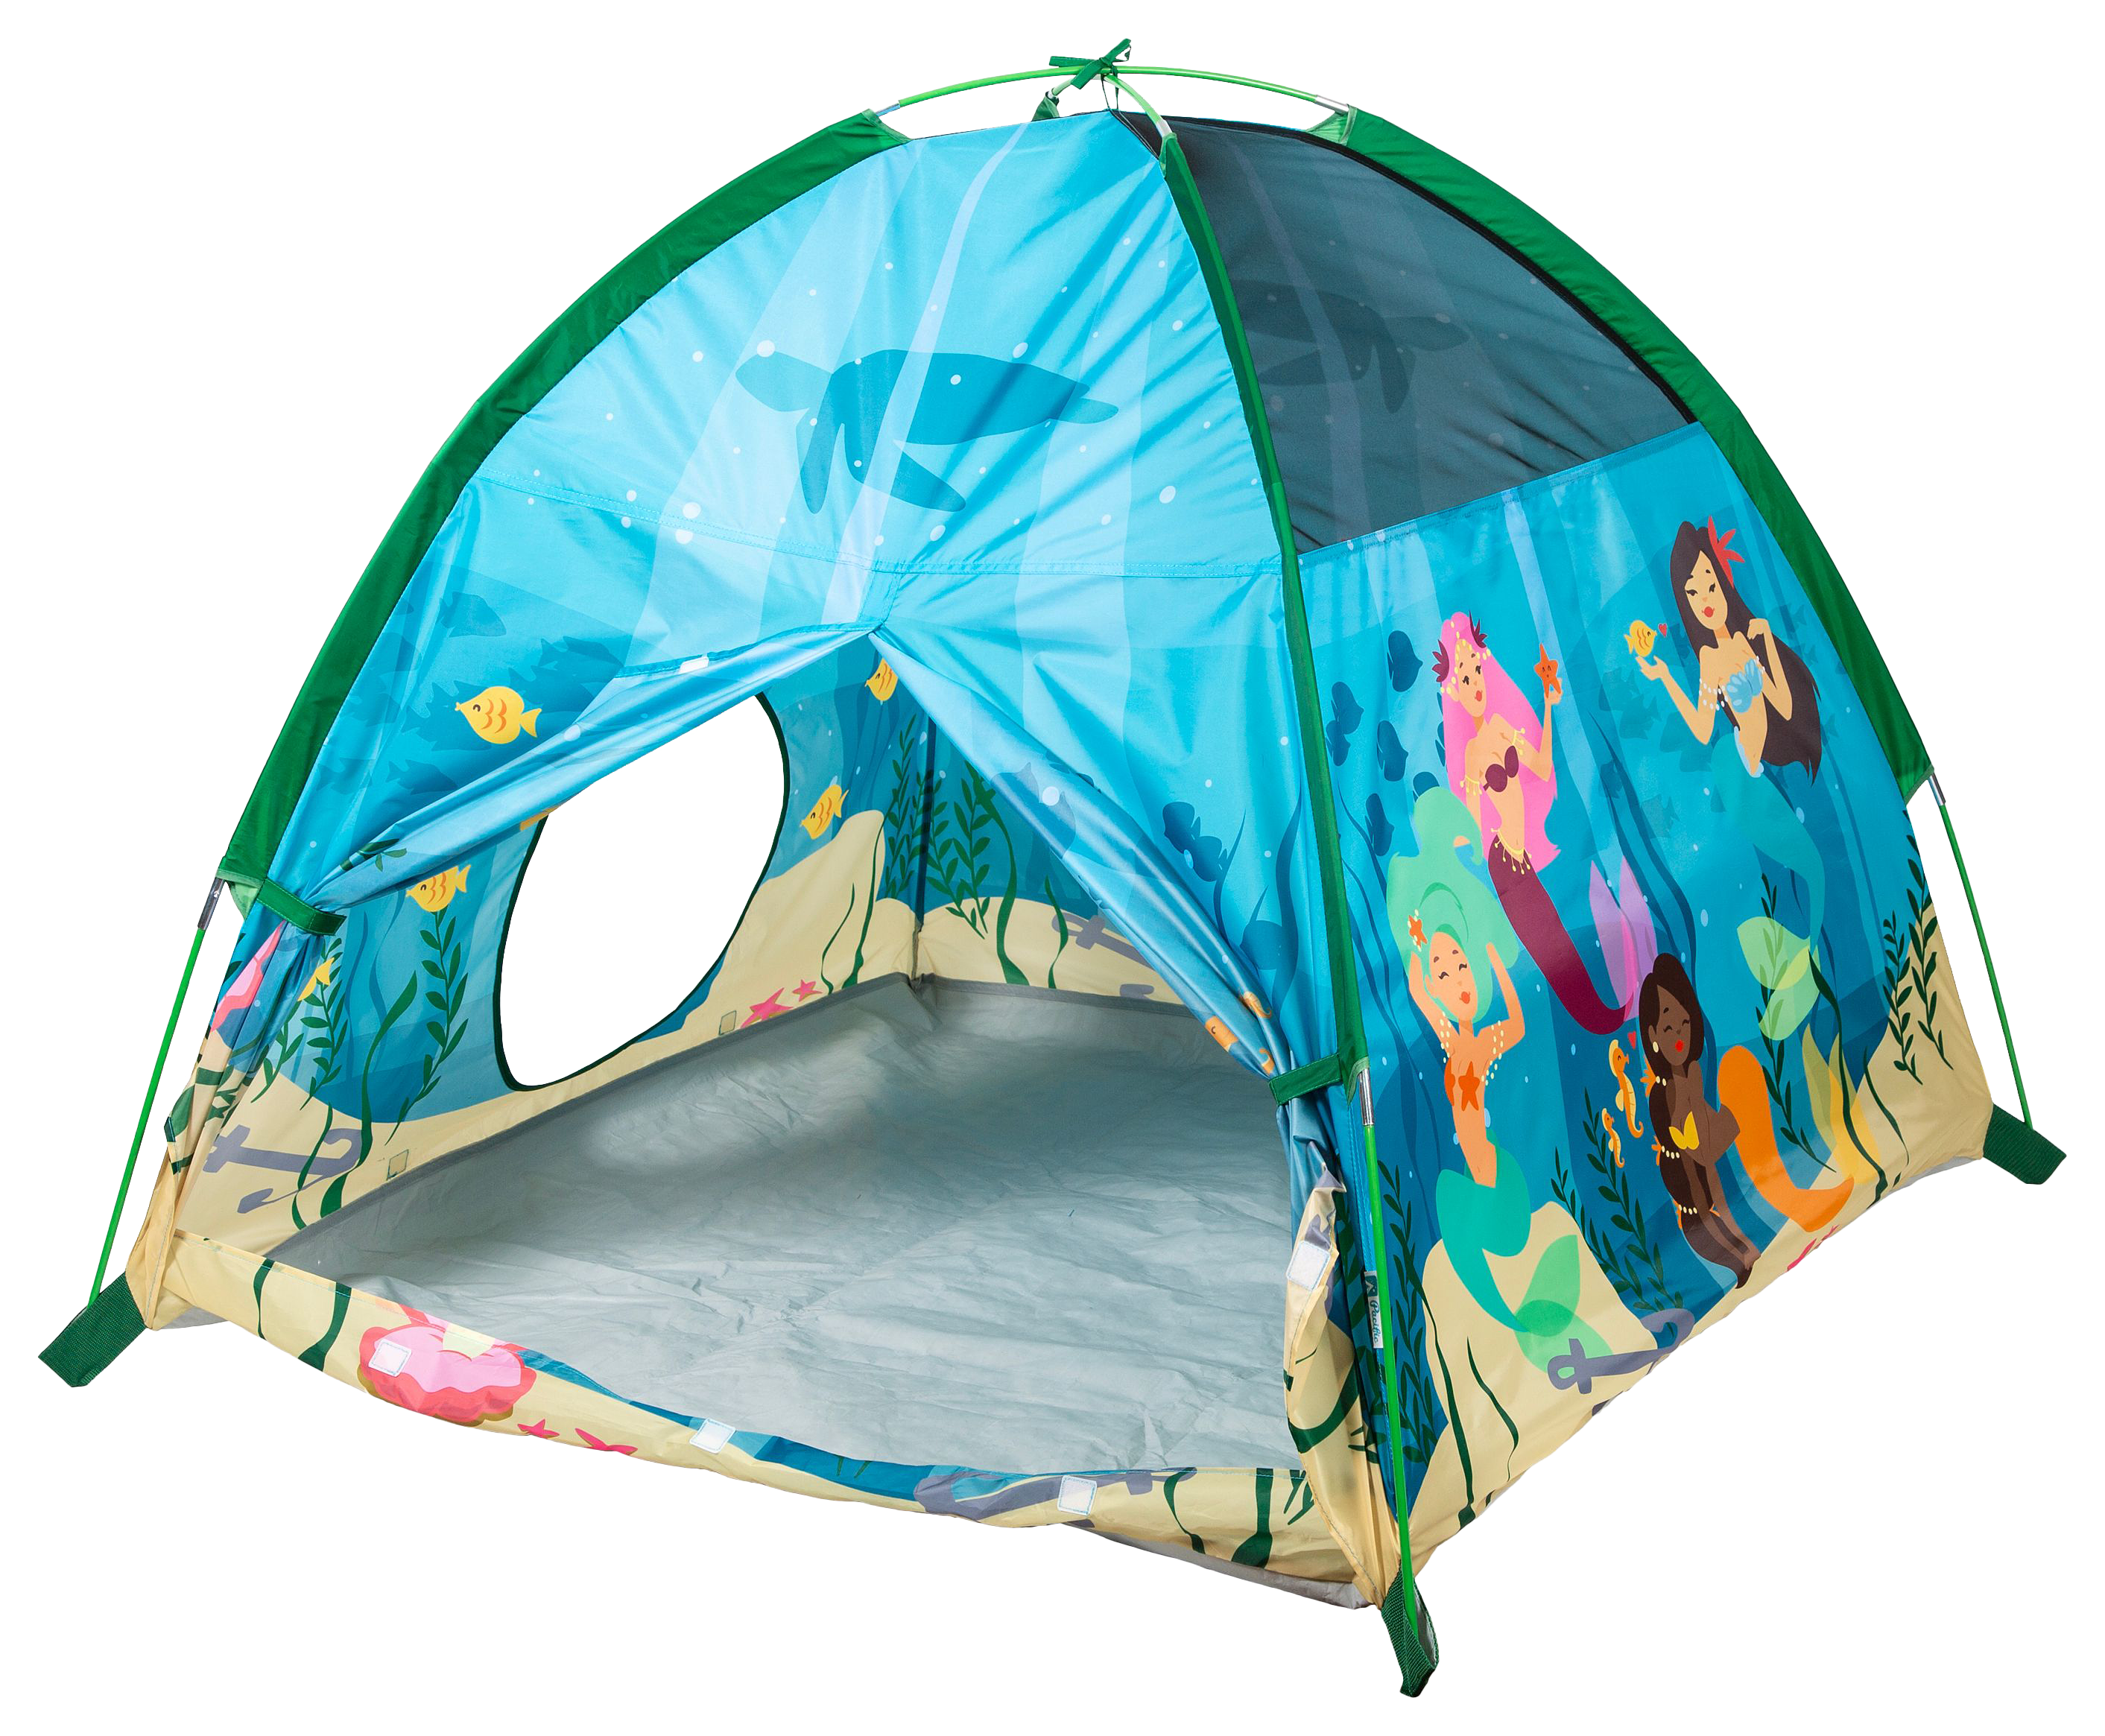 Pacific Play Tents Mermaid Dreams Tent for Kids